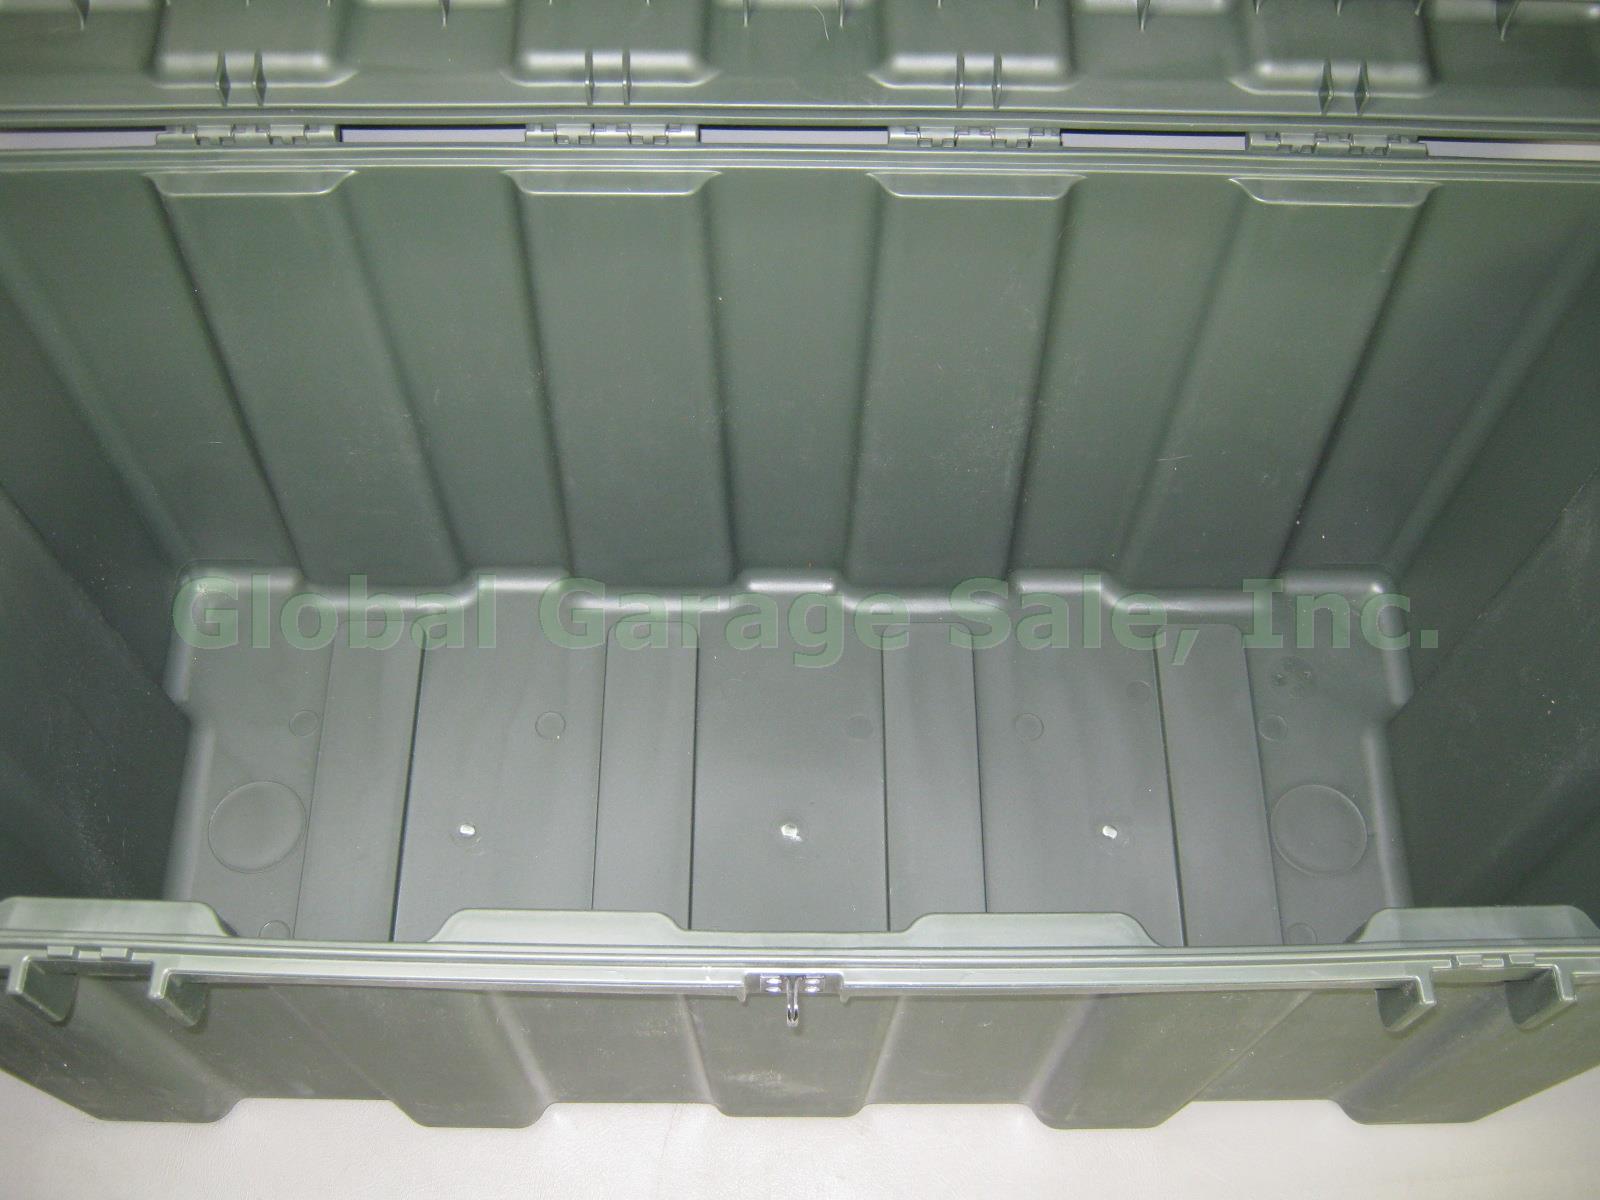 NEW Pelican Hardigg TL 500i US Army Military Foot Locker Trunk With 2 Trays NR! 4